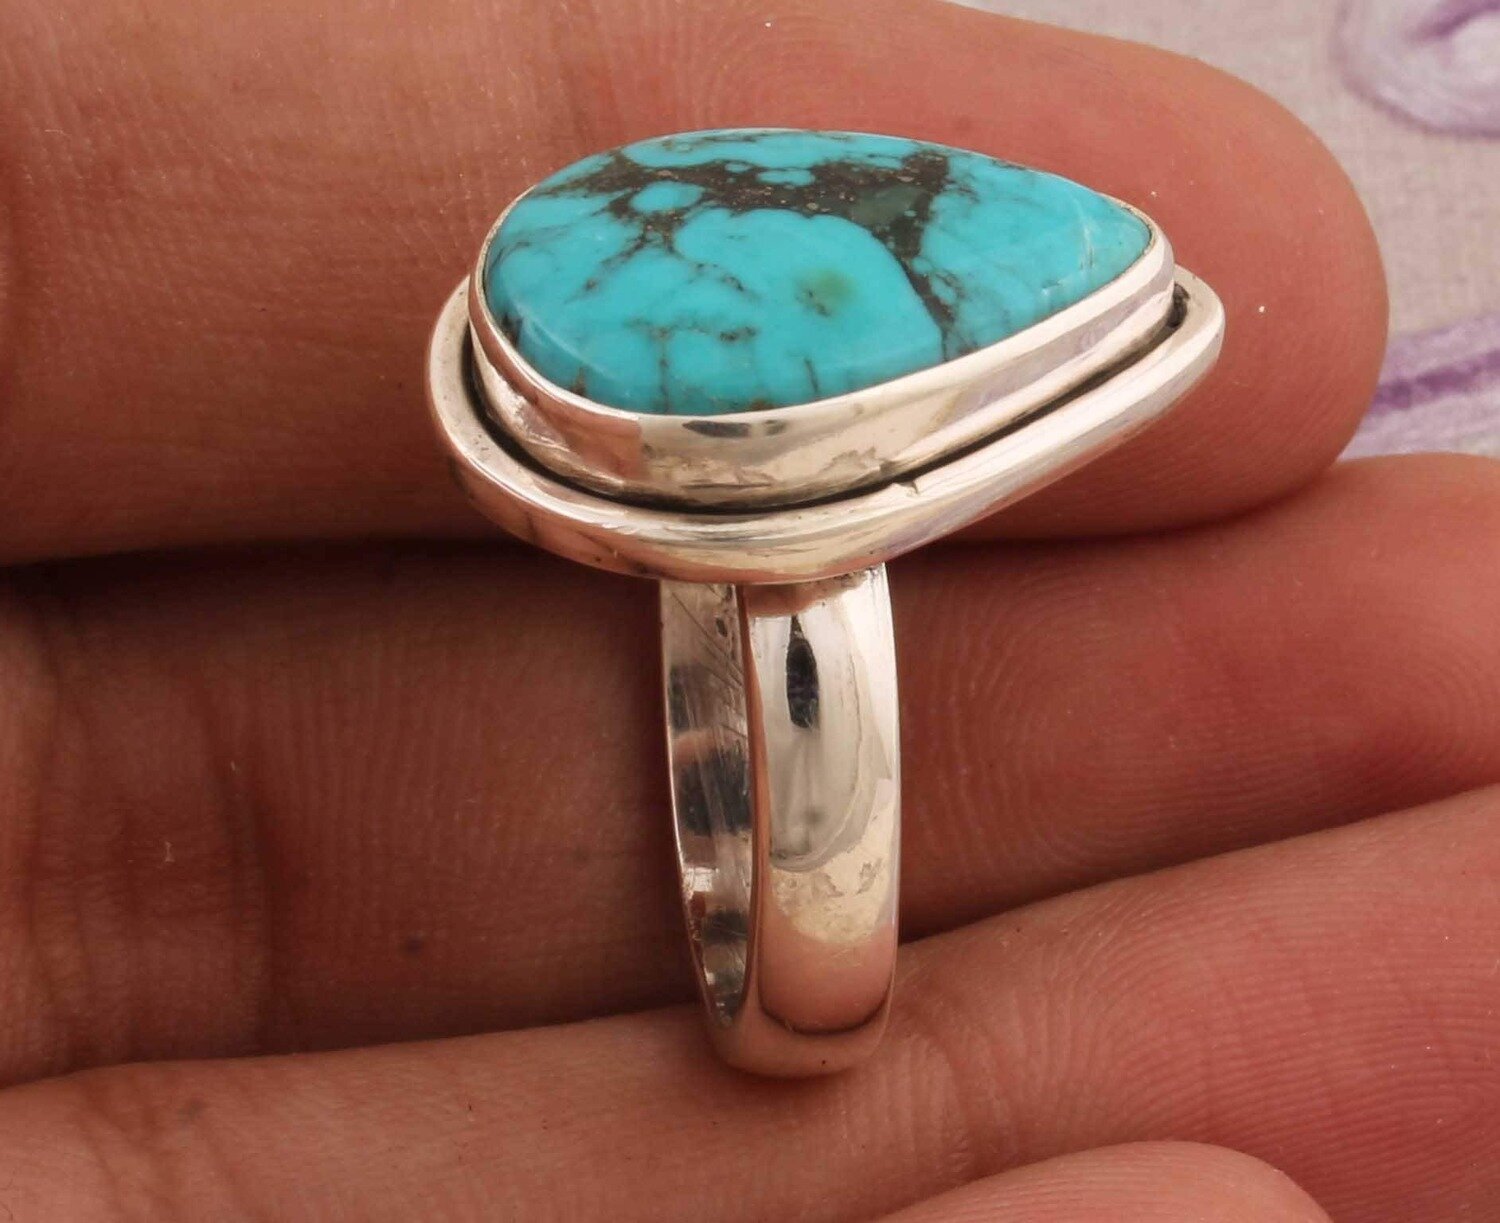 Turquoise Top Quality Gemstone Ring 925-Antique Silver Ring,Sterling Silver Ring,Ring Finger Ring Anniversary Gift RingBestseller2021Etsy